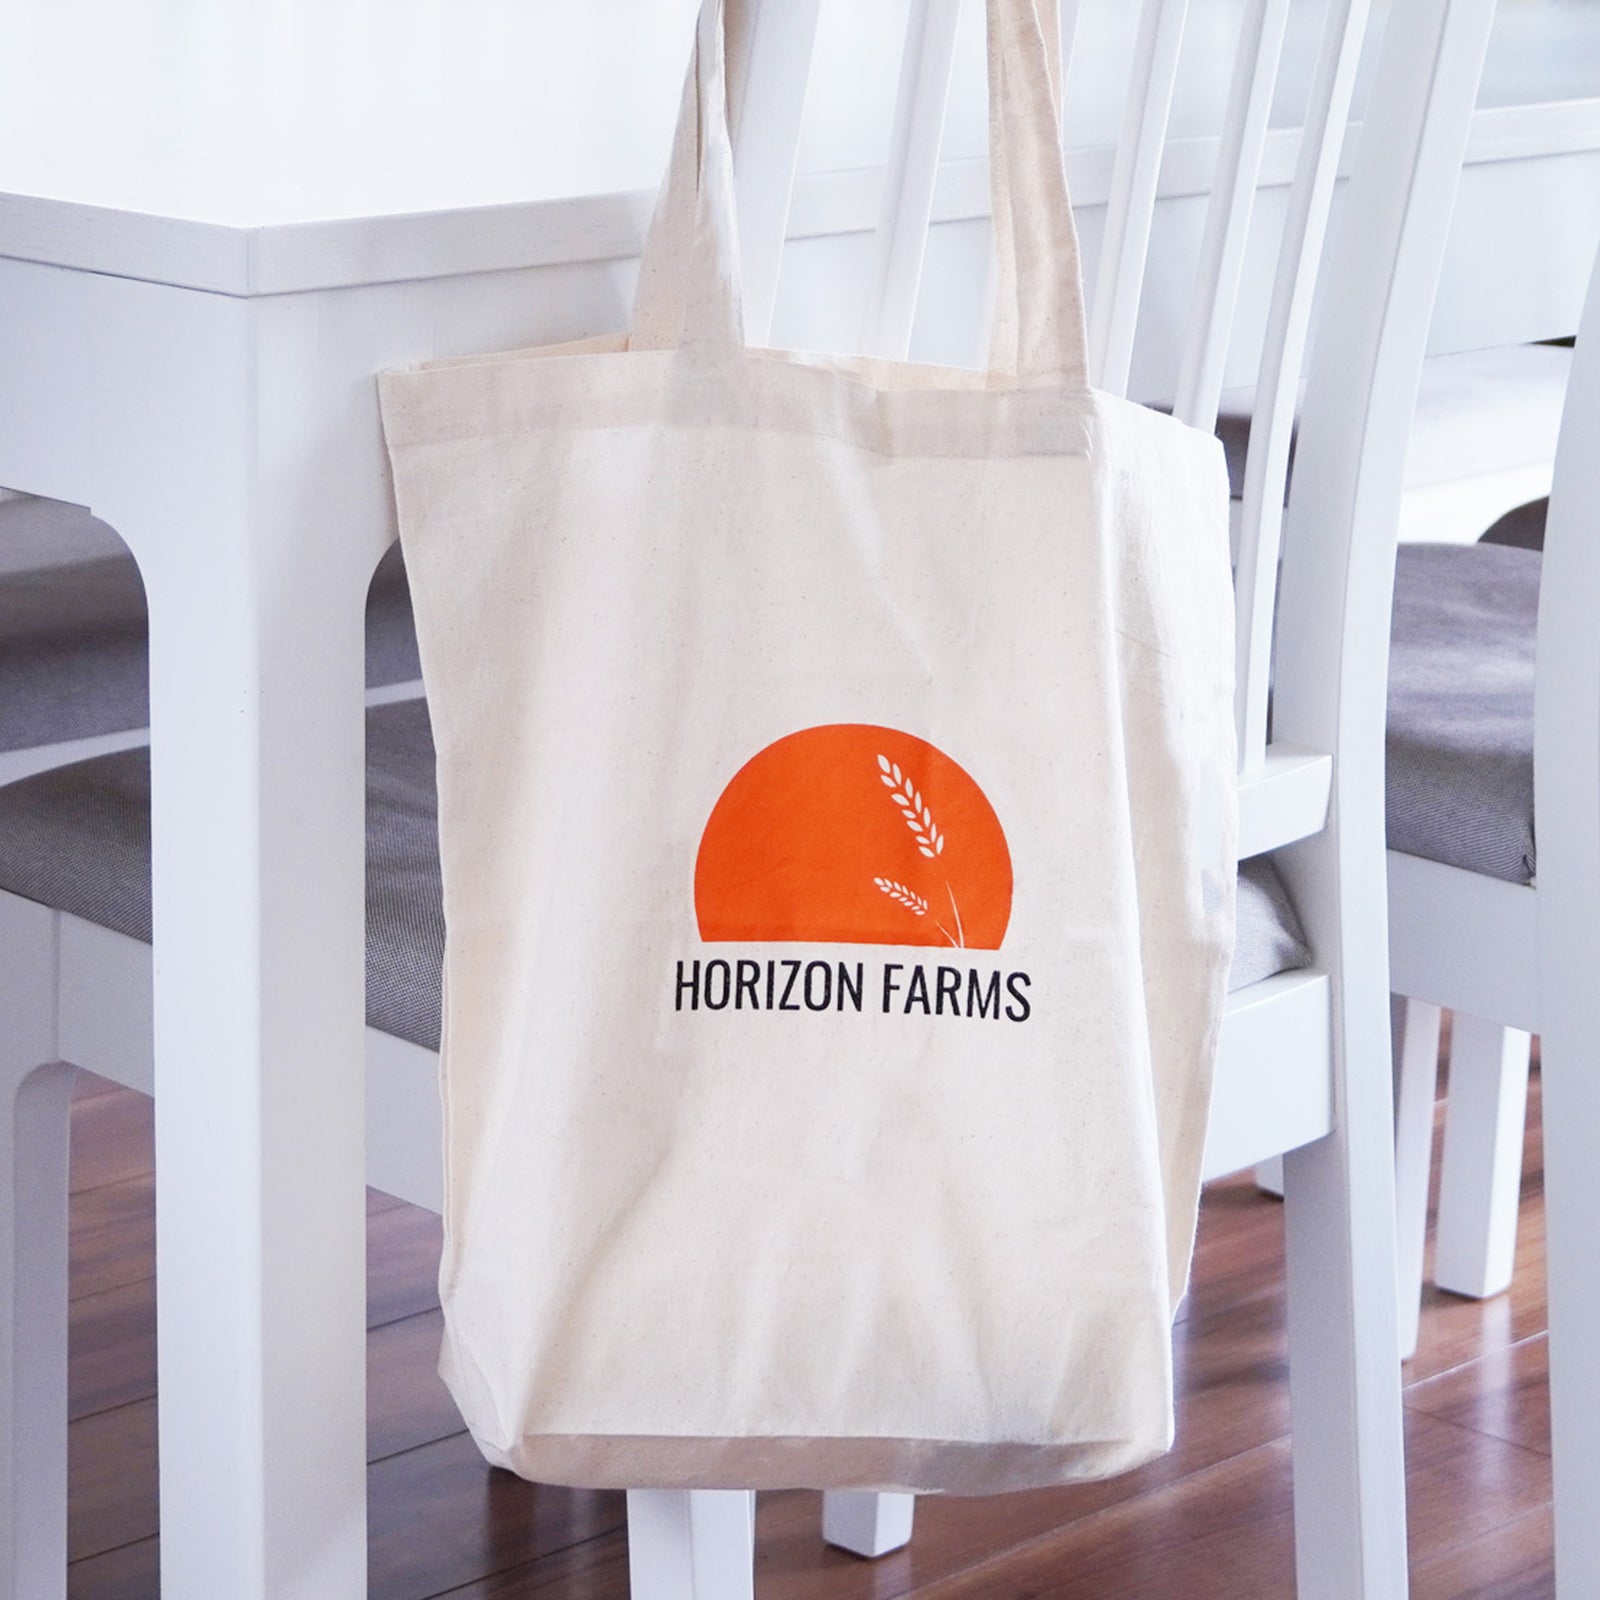 Original Compact Eco Tote Bag 100% Organic Cotton Unbleached - (Also Available For Free!) - Horizon Farms